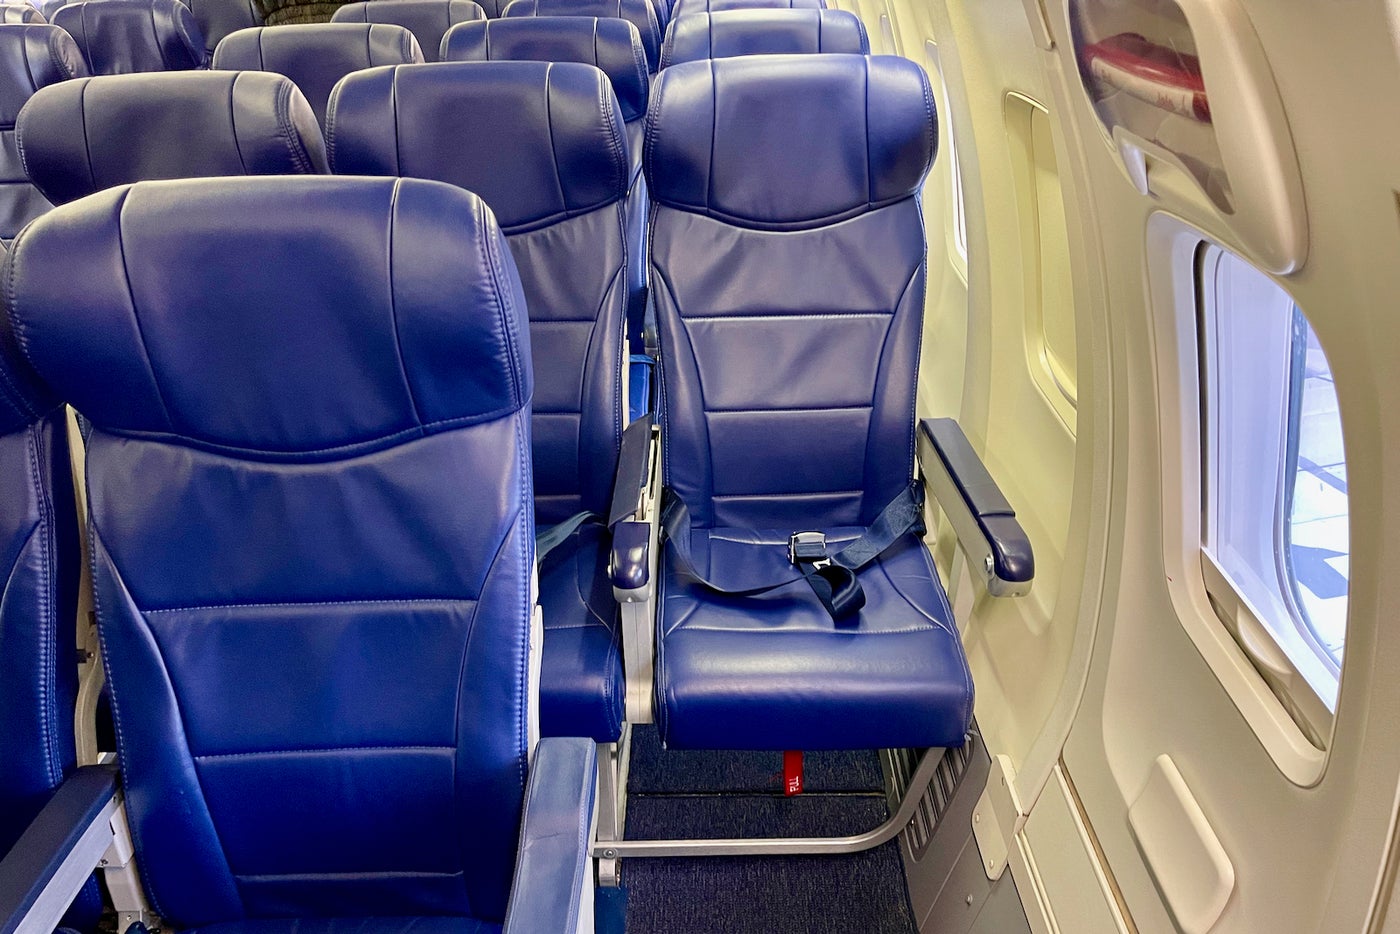 southwest no seat assignment